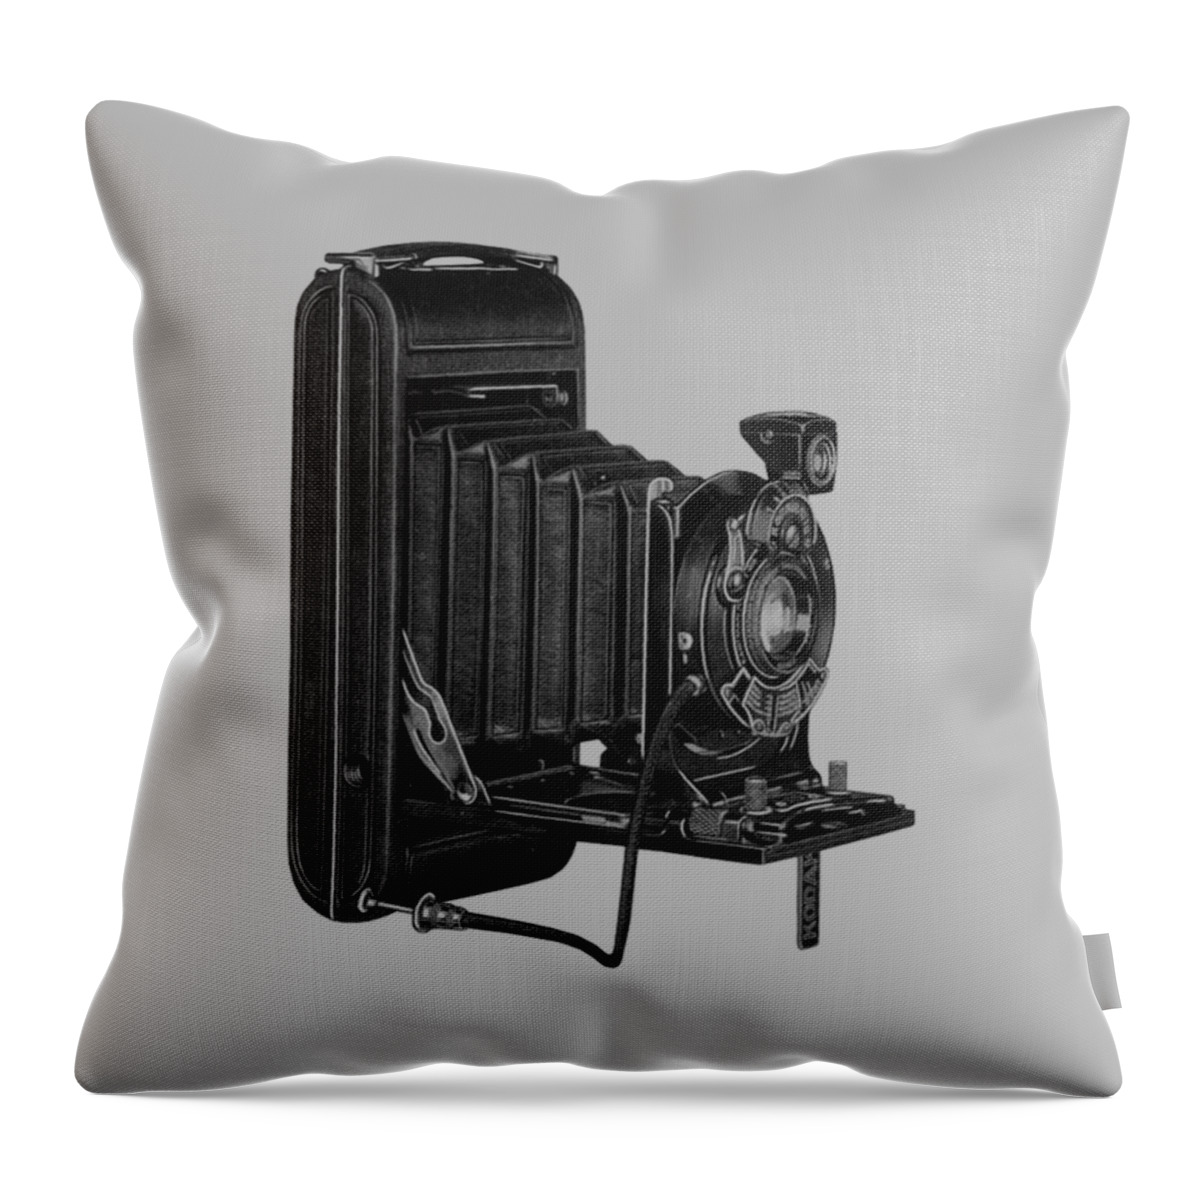 Photo Throw Pillow featuring the digital art Folding camera in black and white by Madame Memento